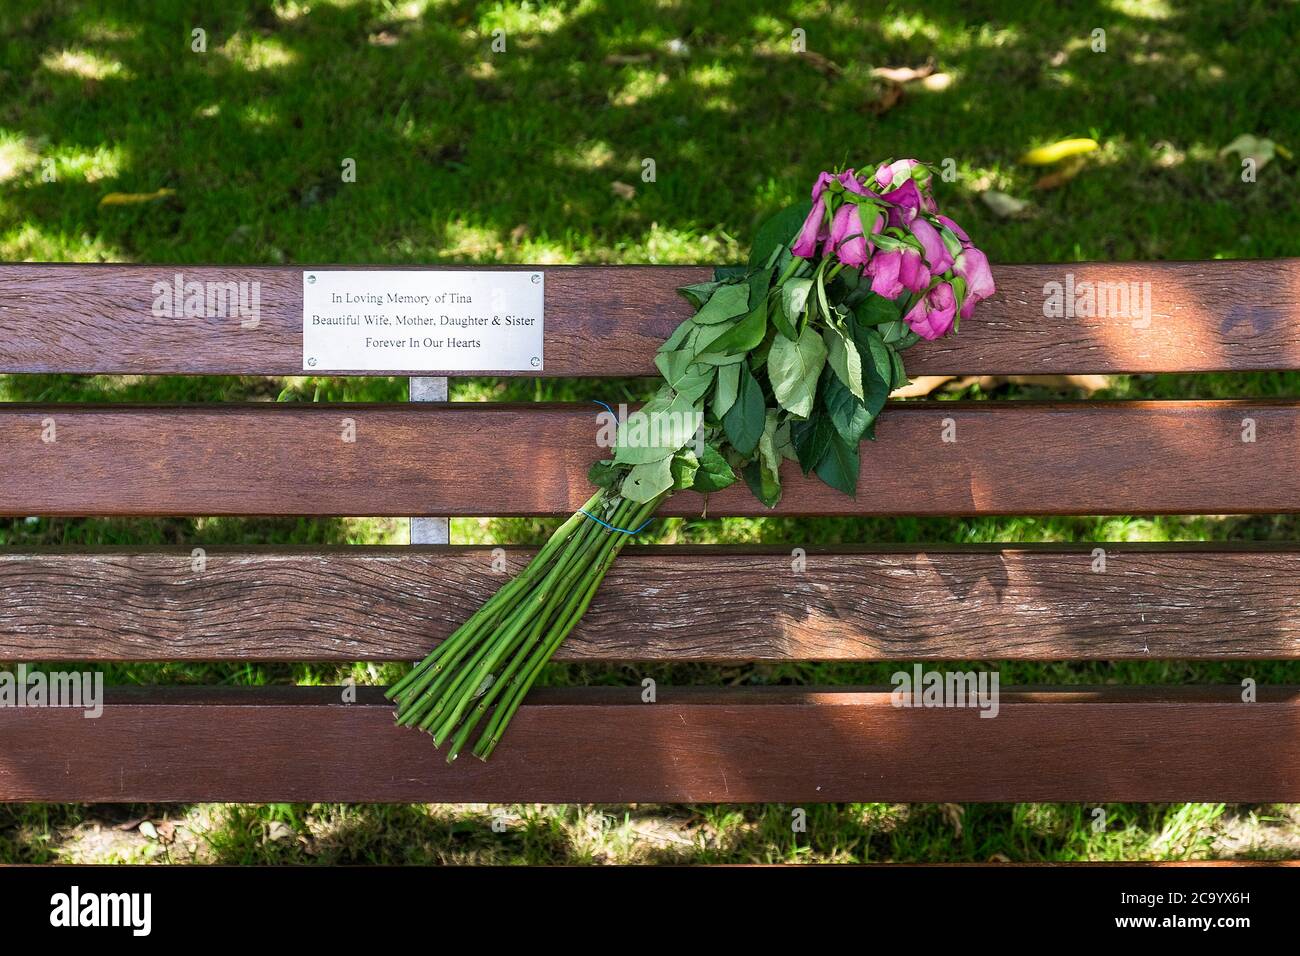 A bouquet of wilting roses attached to a memorial bench in a park. Stock Photo